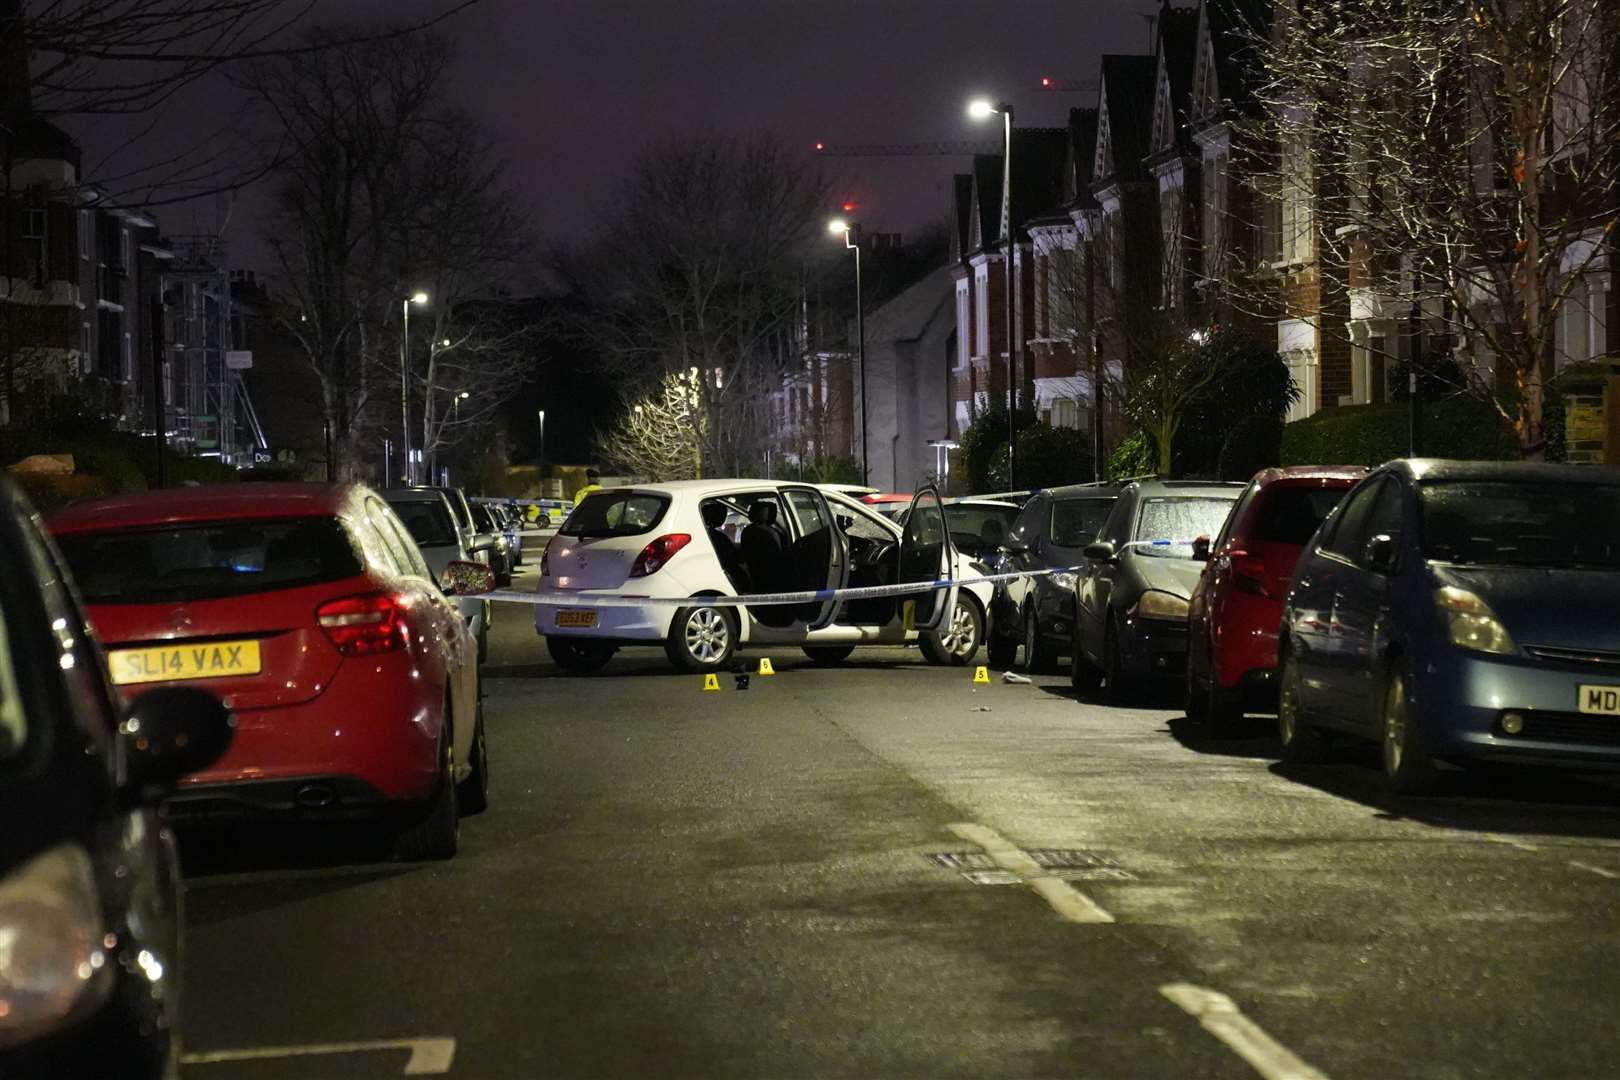 The scene of the incident near Clapham Common (James Weech/PA)